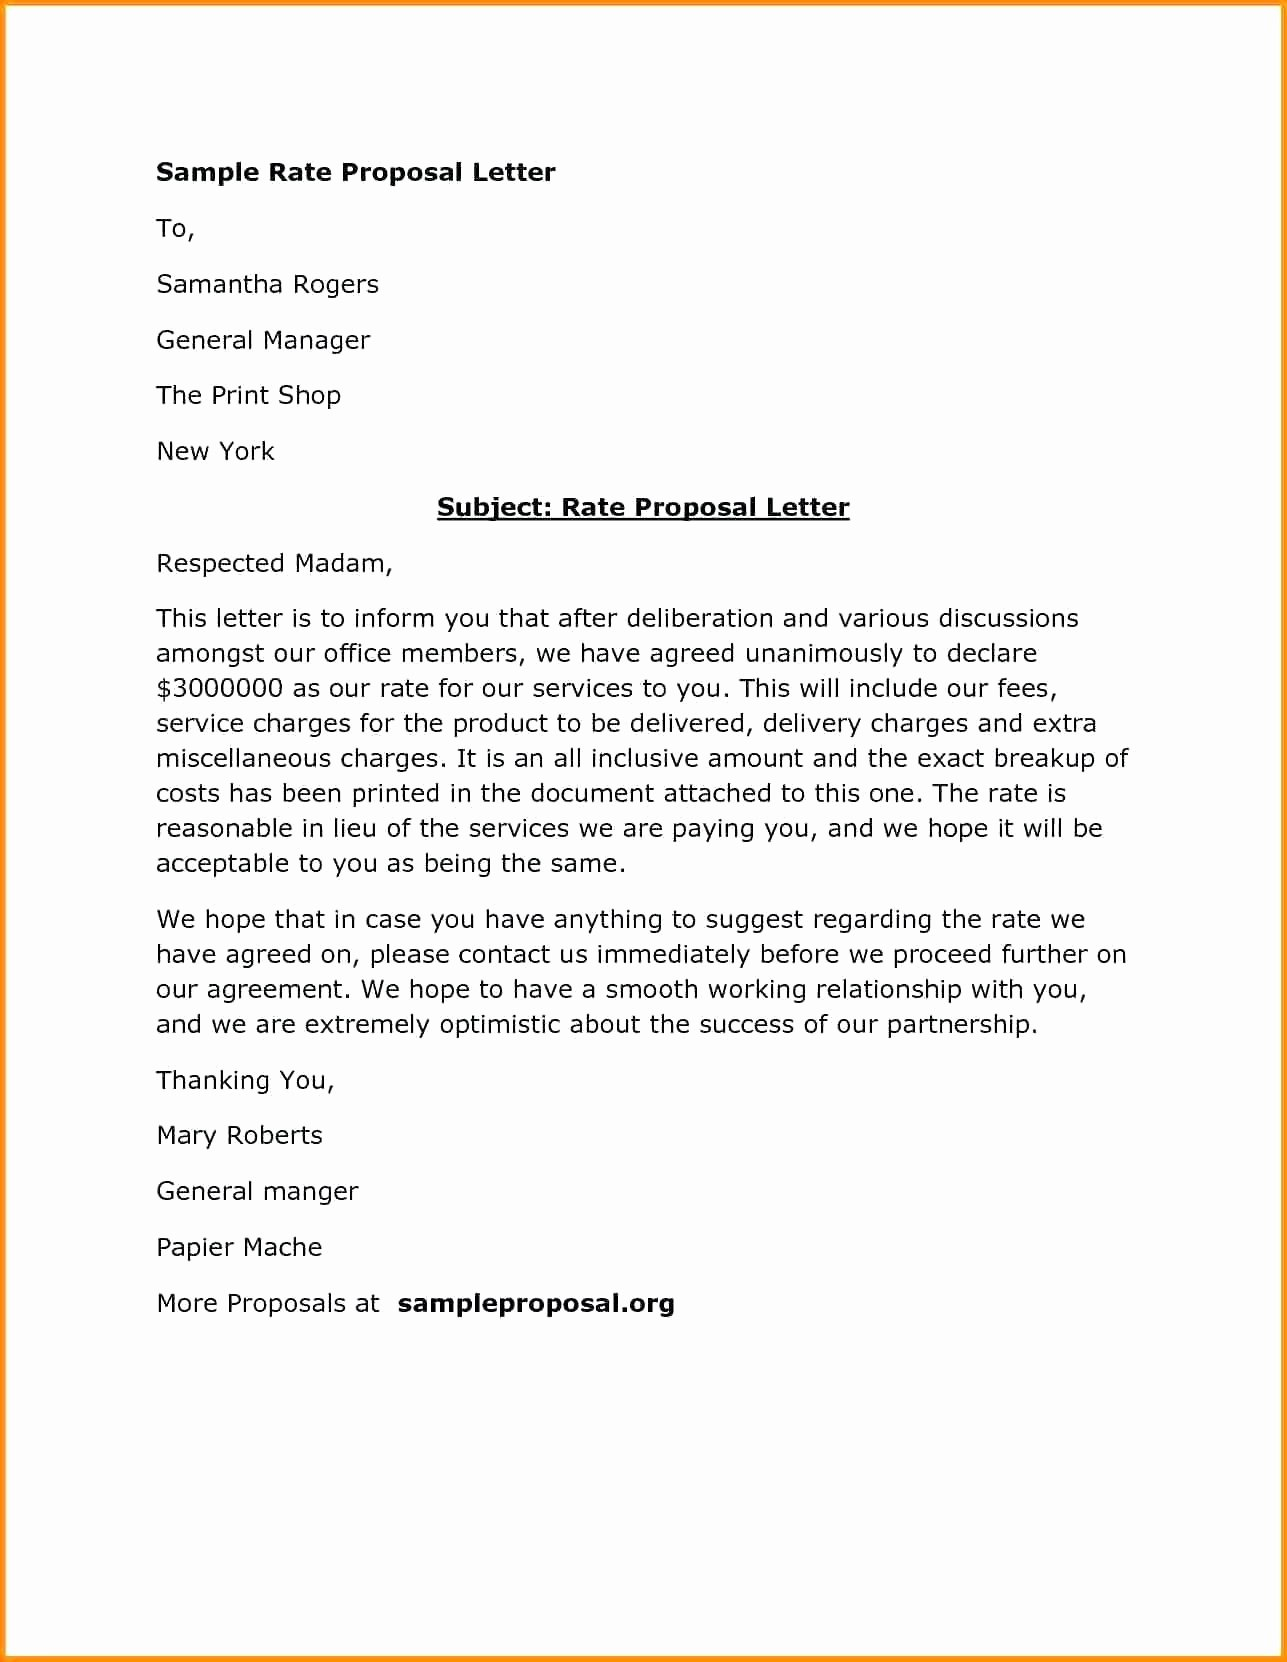 Business Collaboration Proposal Letter Sample – Guiaubuntupt intended for Business Partnership Proposal Letter Template